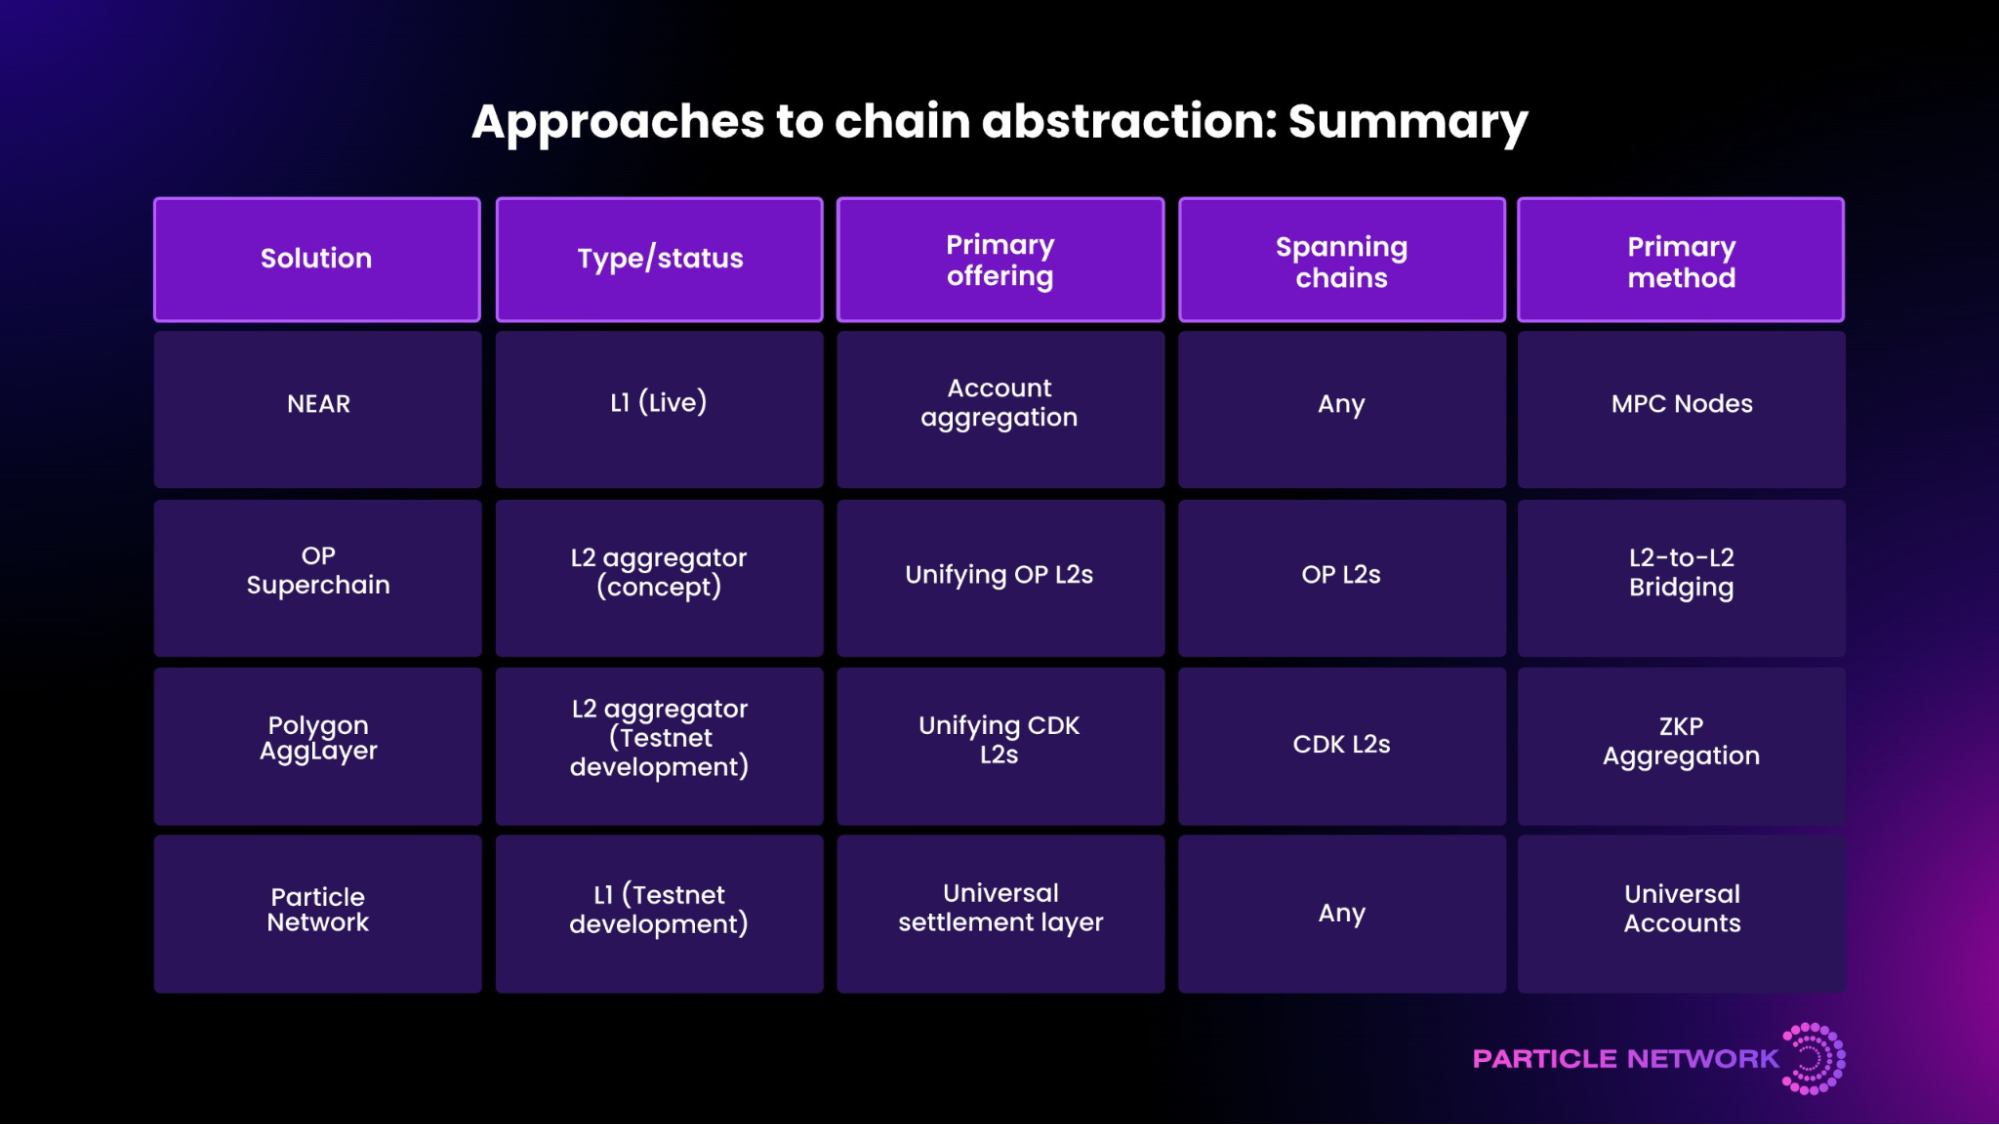 Navigating the Chain Abstraction Landscape: A Multi-Faceted Analysis